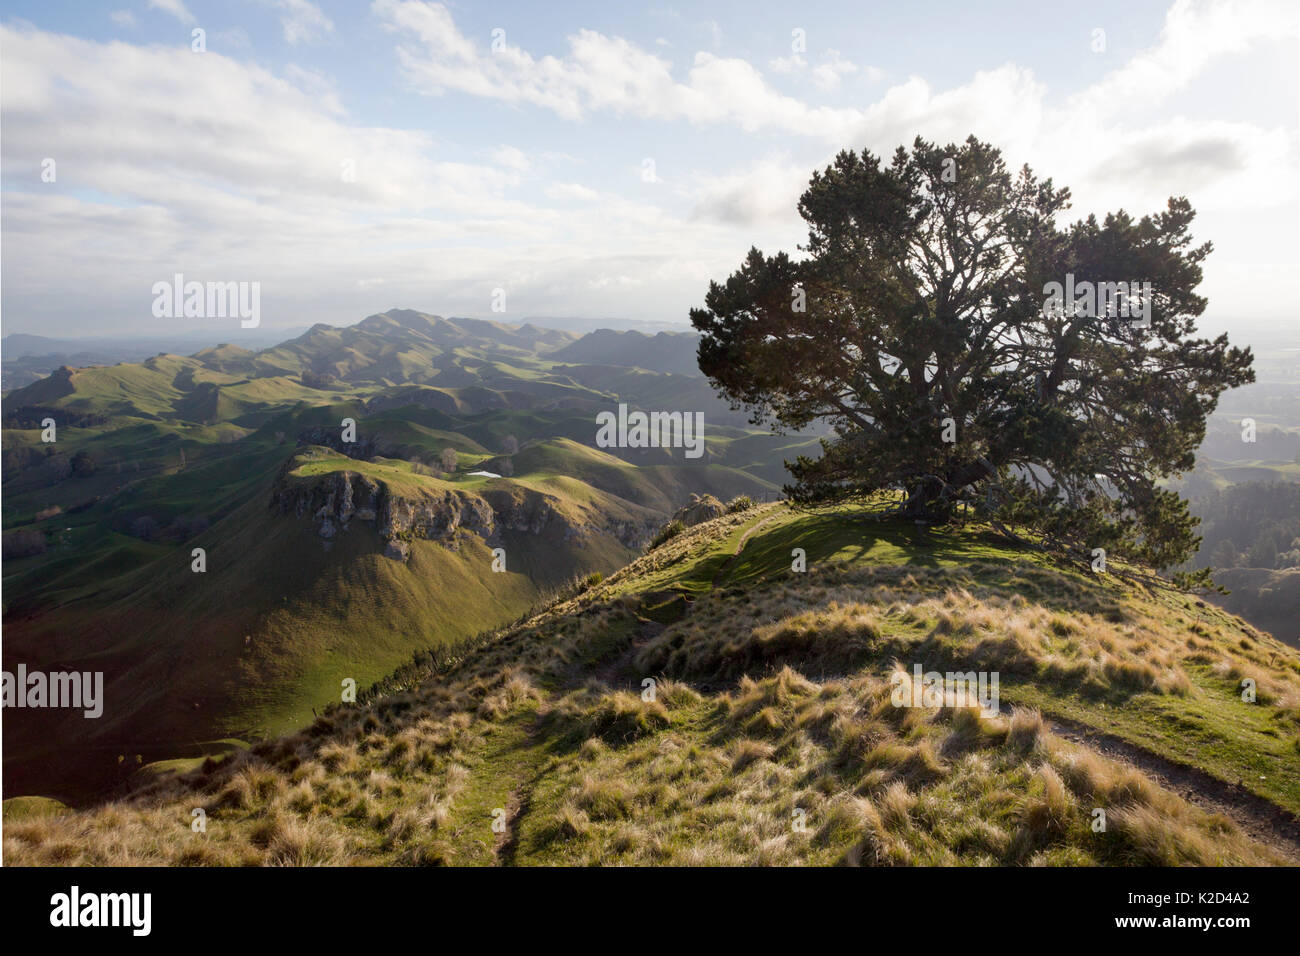 View to the South from Te Mata Peak, past a big old Monterey pine (Pinus radiata) tree, with the hills dappled in sunshine and shade, Te Mata Peak, Hawkes Bay, New Zealand, September 2011. Stock Photo